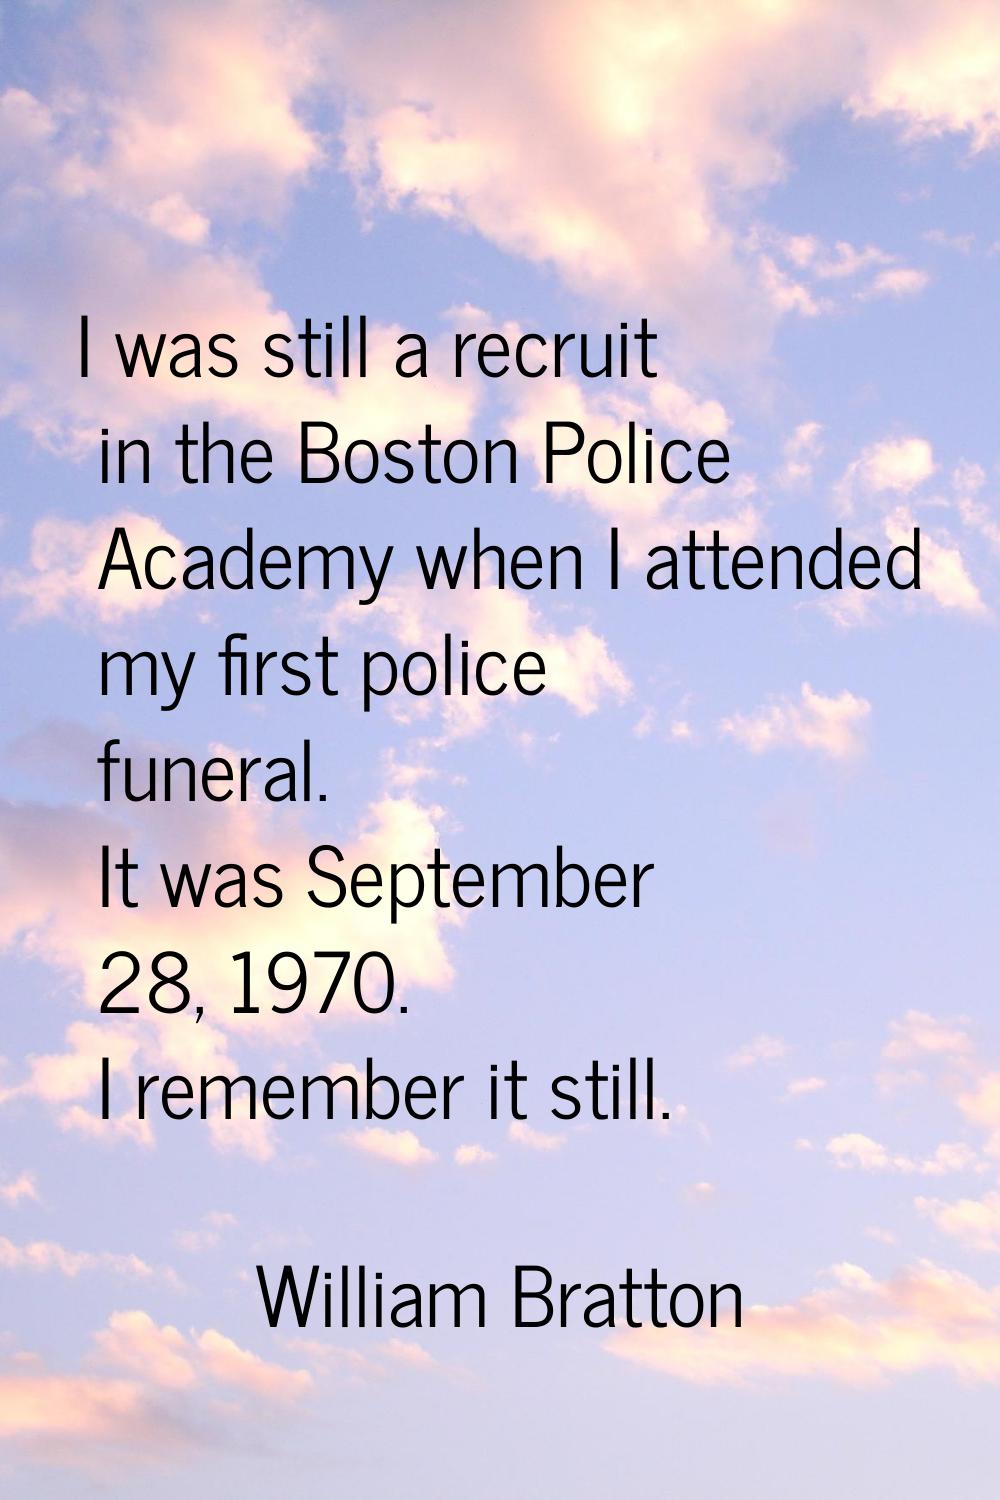 I was still a recruit in the Boston Police Academy when I attended my first police funeral. It was 